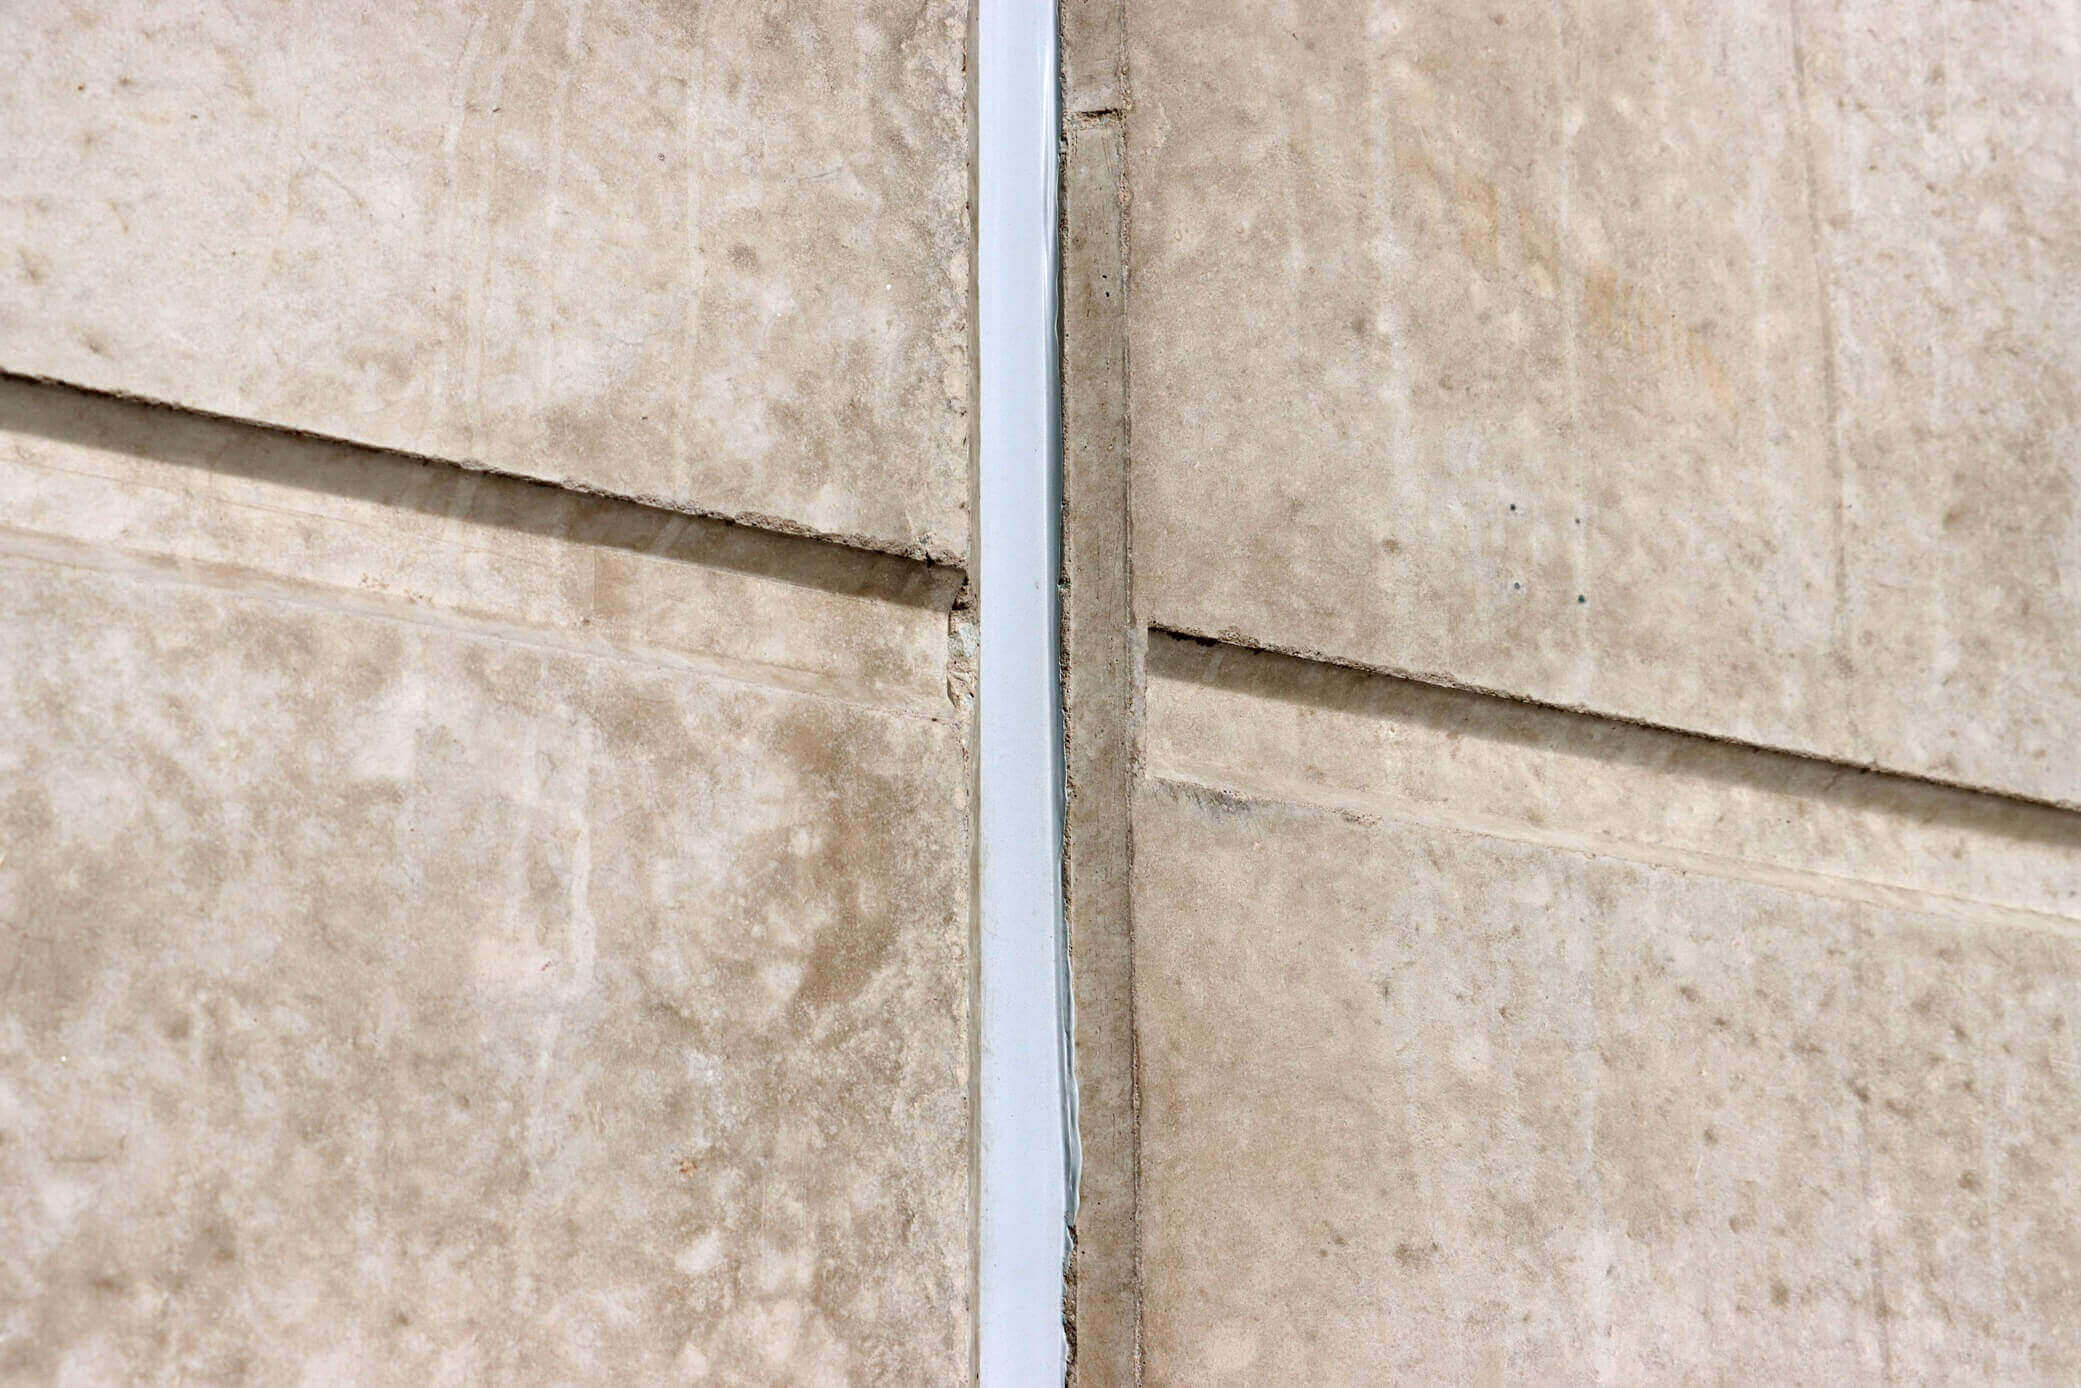 Concrete wall expansion joint with new polyurethane putty sealant